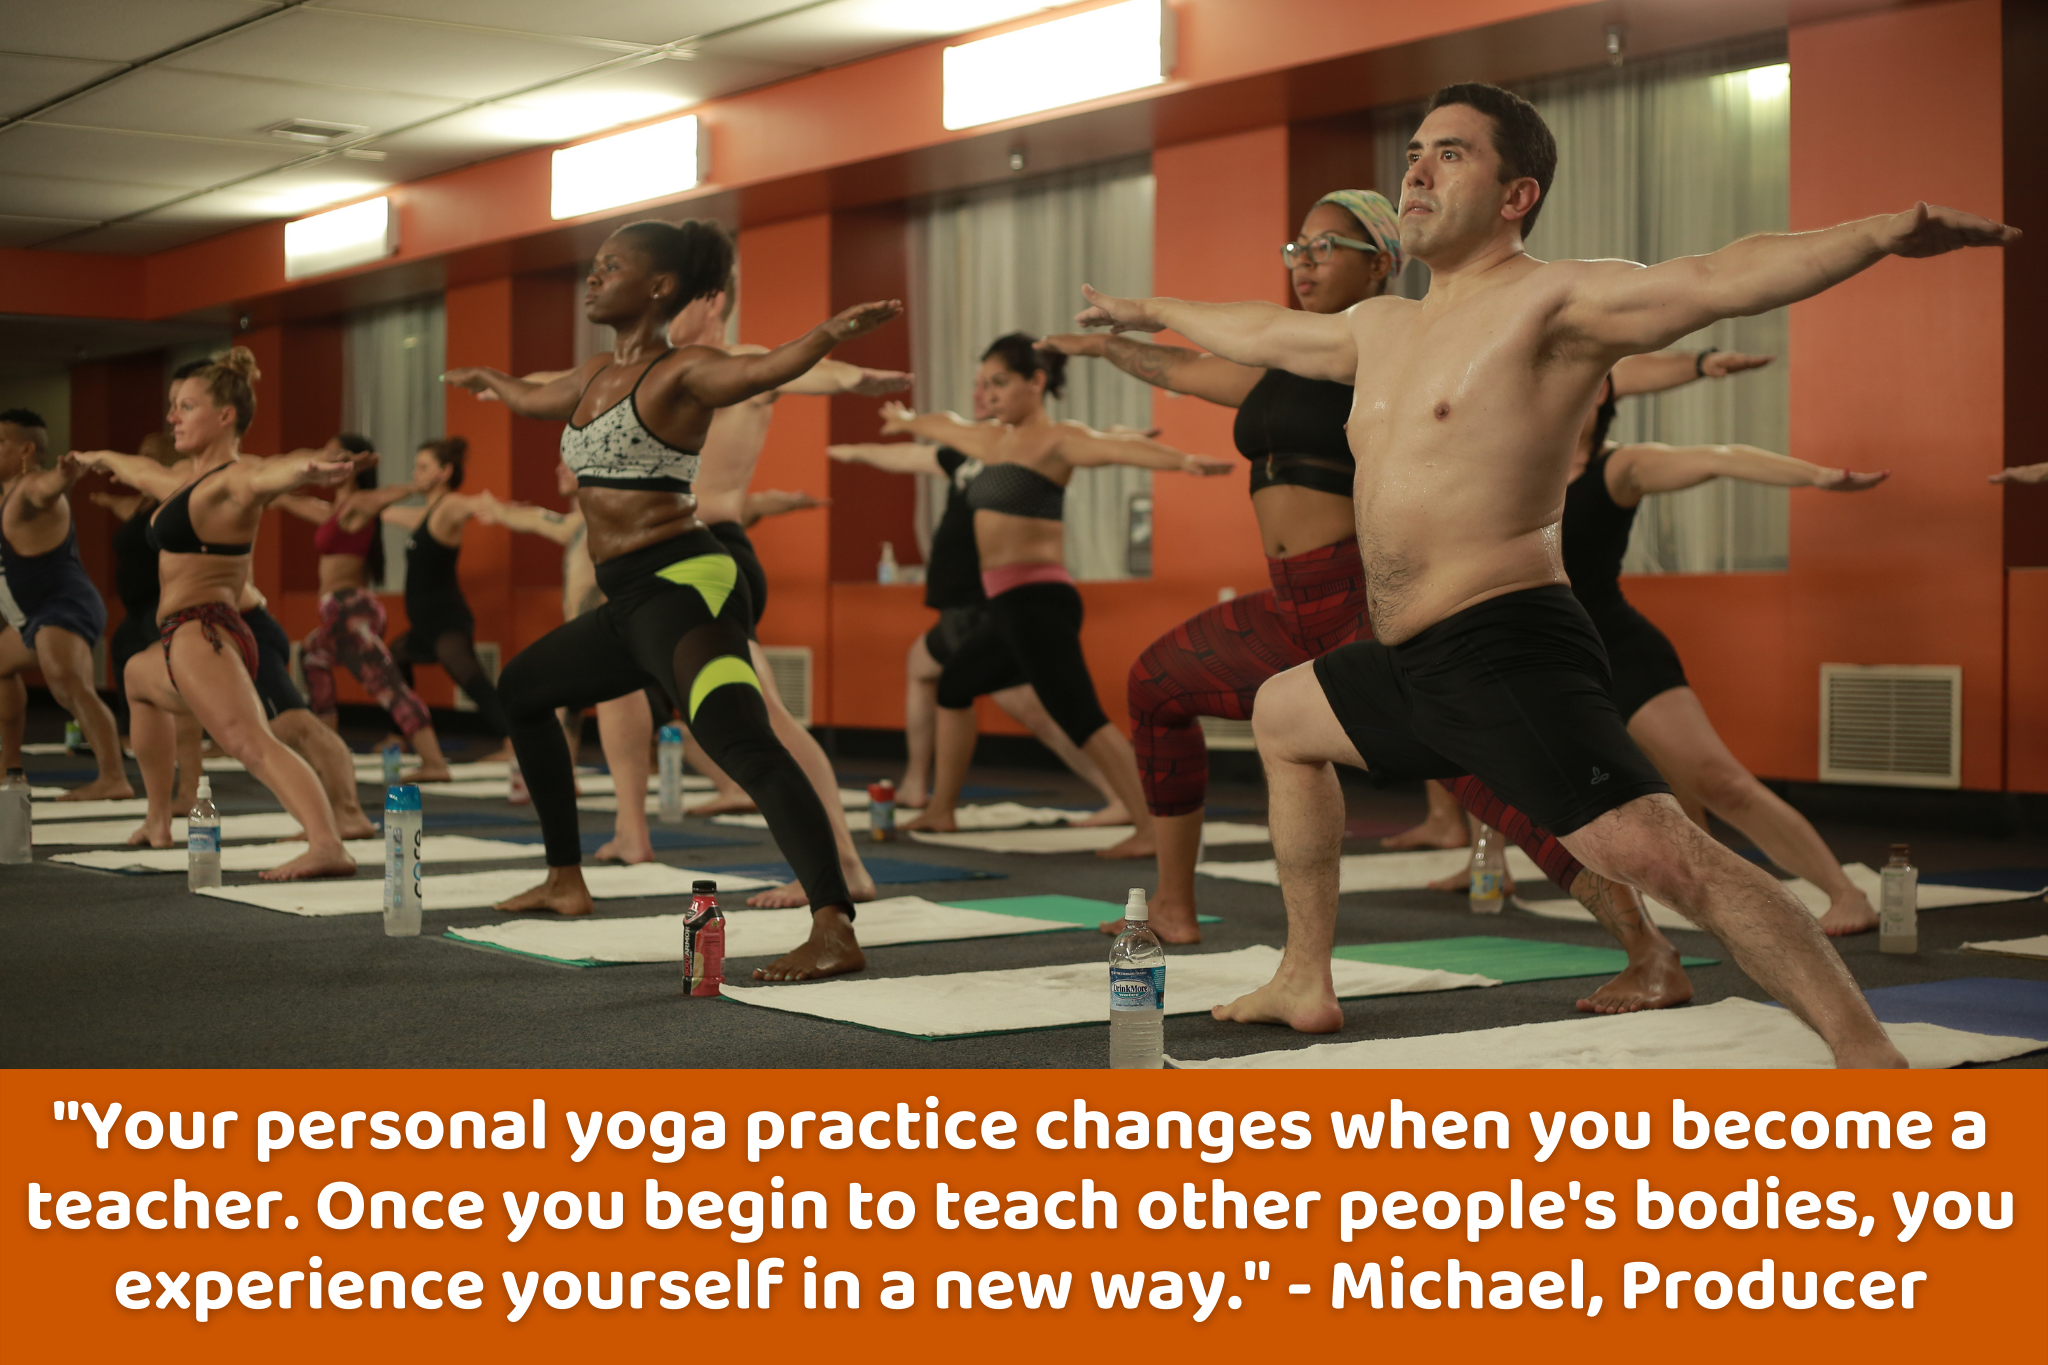 Your personal yoga practice changes when you become a teacher. Once you begin to teach other people's bodies, you experience yourself in a new way - Michael, Producer